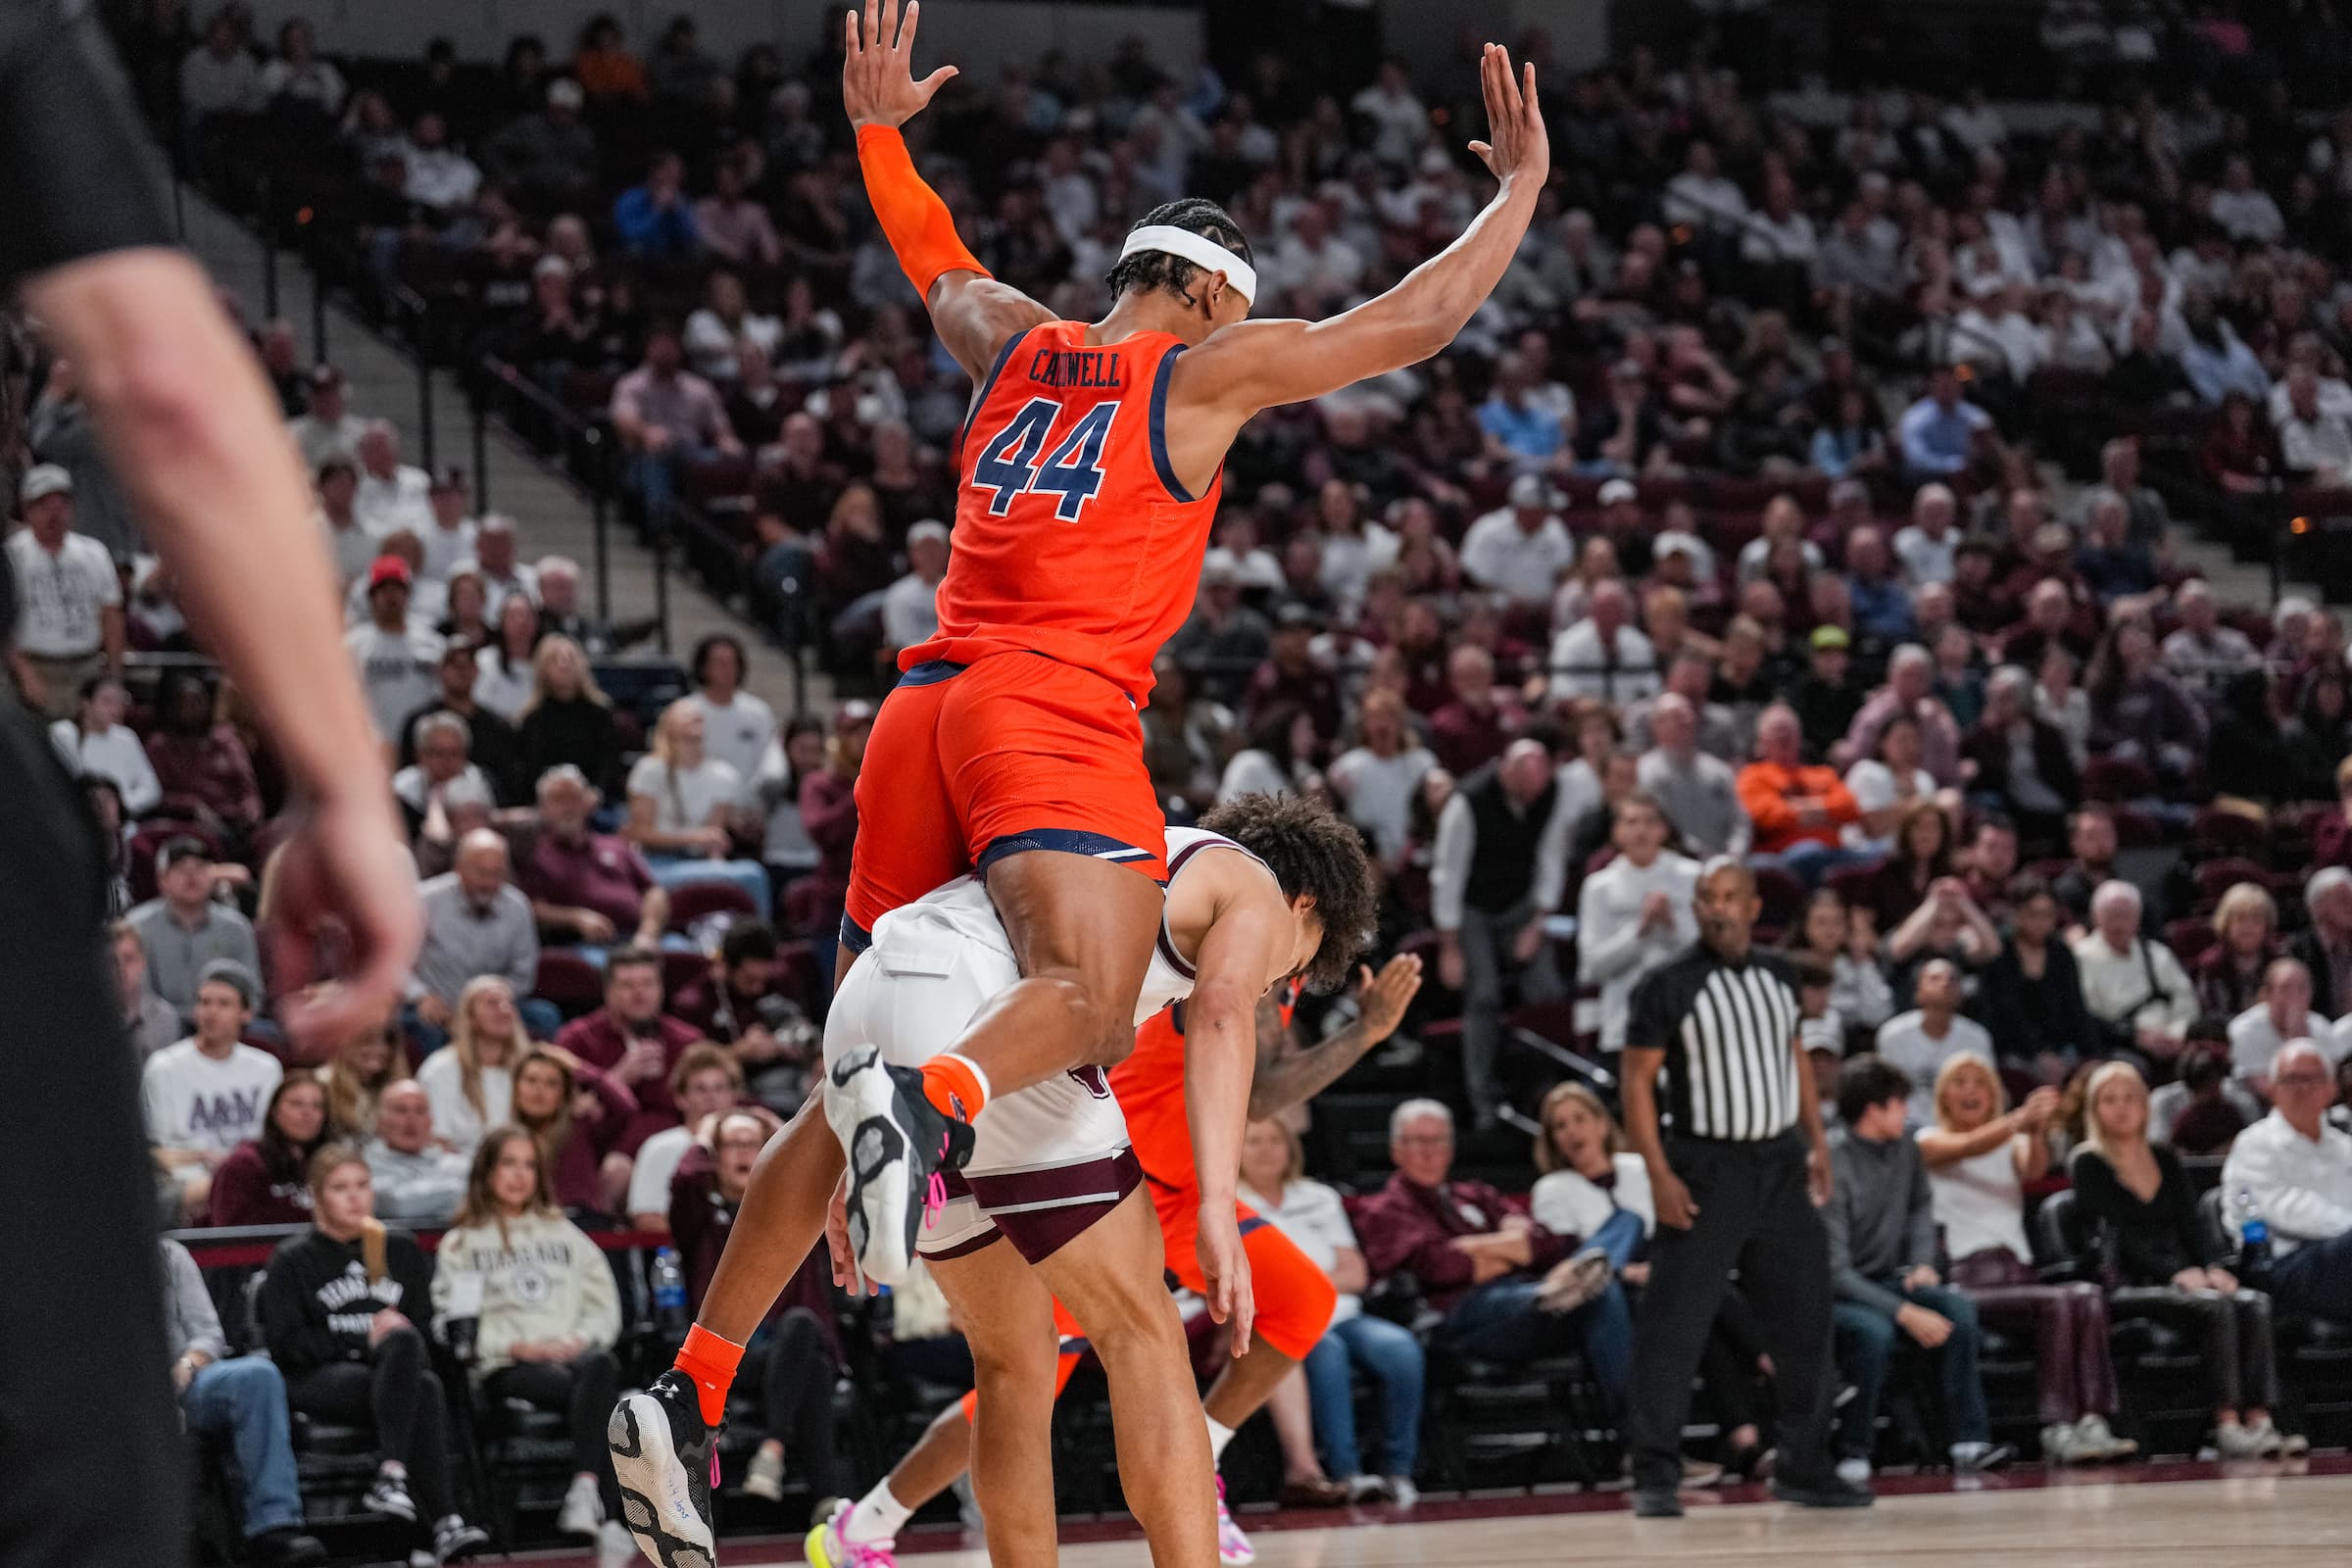 Dylan Cardwell (44) during the game between the Texas A&M Aggies and the #29 Auburn Tigers at Reed Arena in College Station, TX on Tuesday, Feb 7, 2023. Steven Leonard/Auburn Tigers